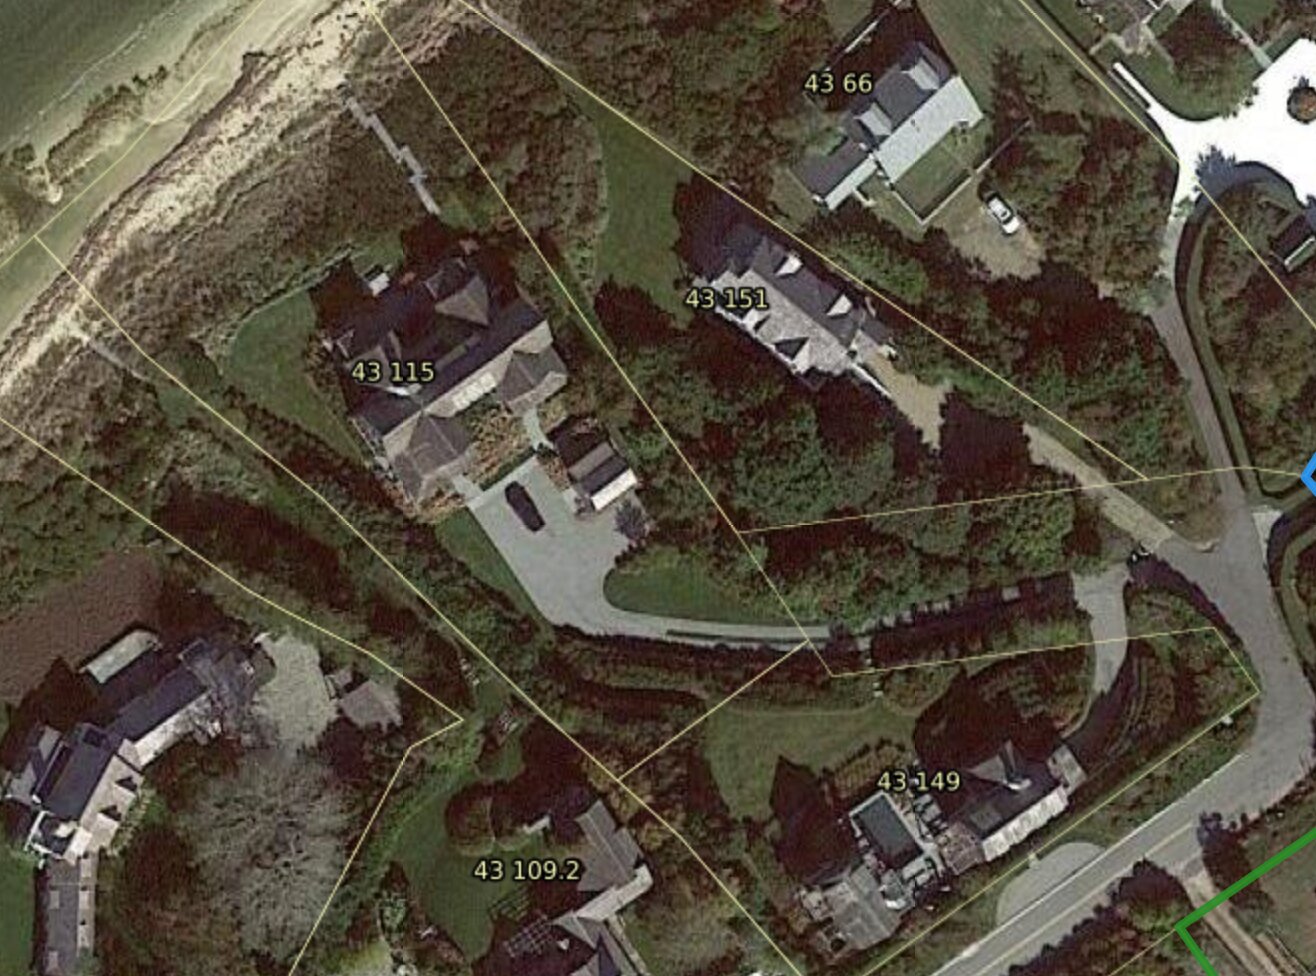 Barstool Sports founder Dave Portnoy is believed to have purchased the properties at 68 and 72 Monomoy Road, center, for $42 million.